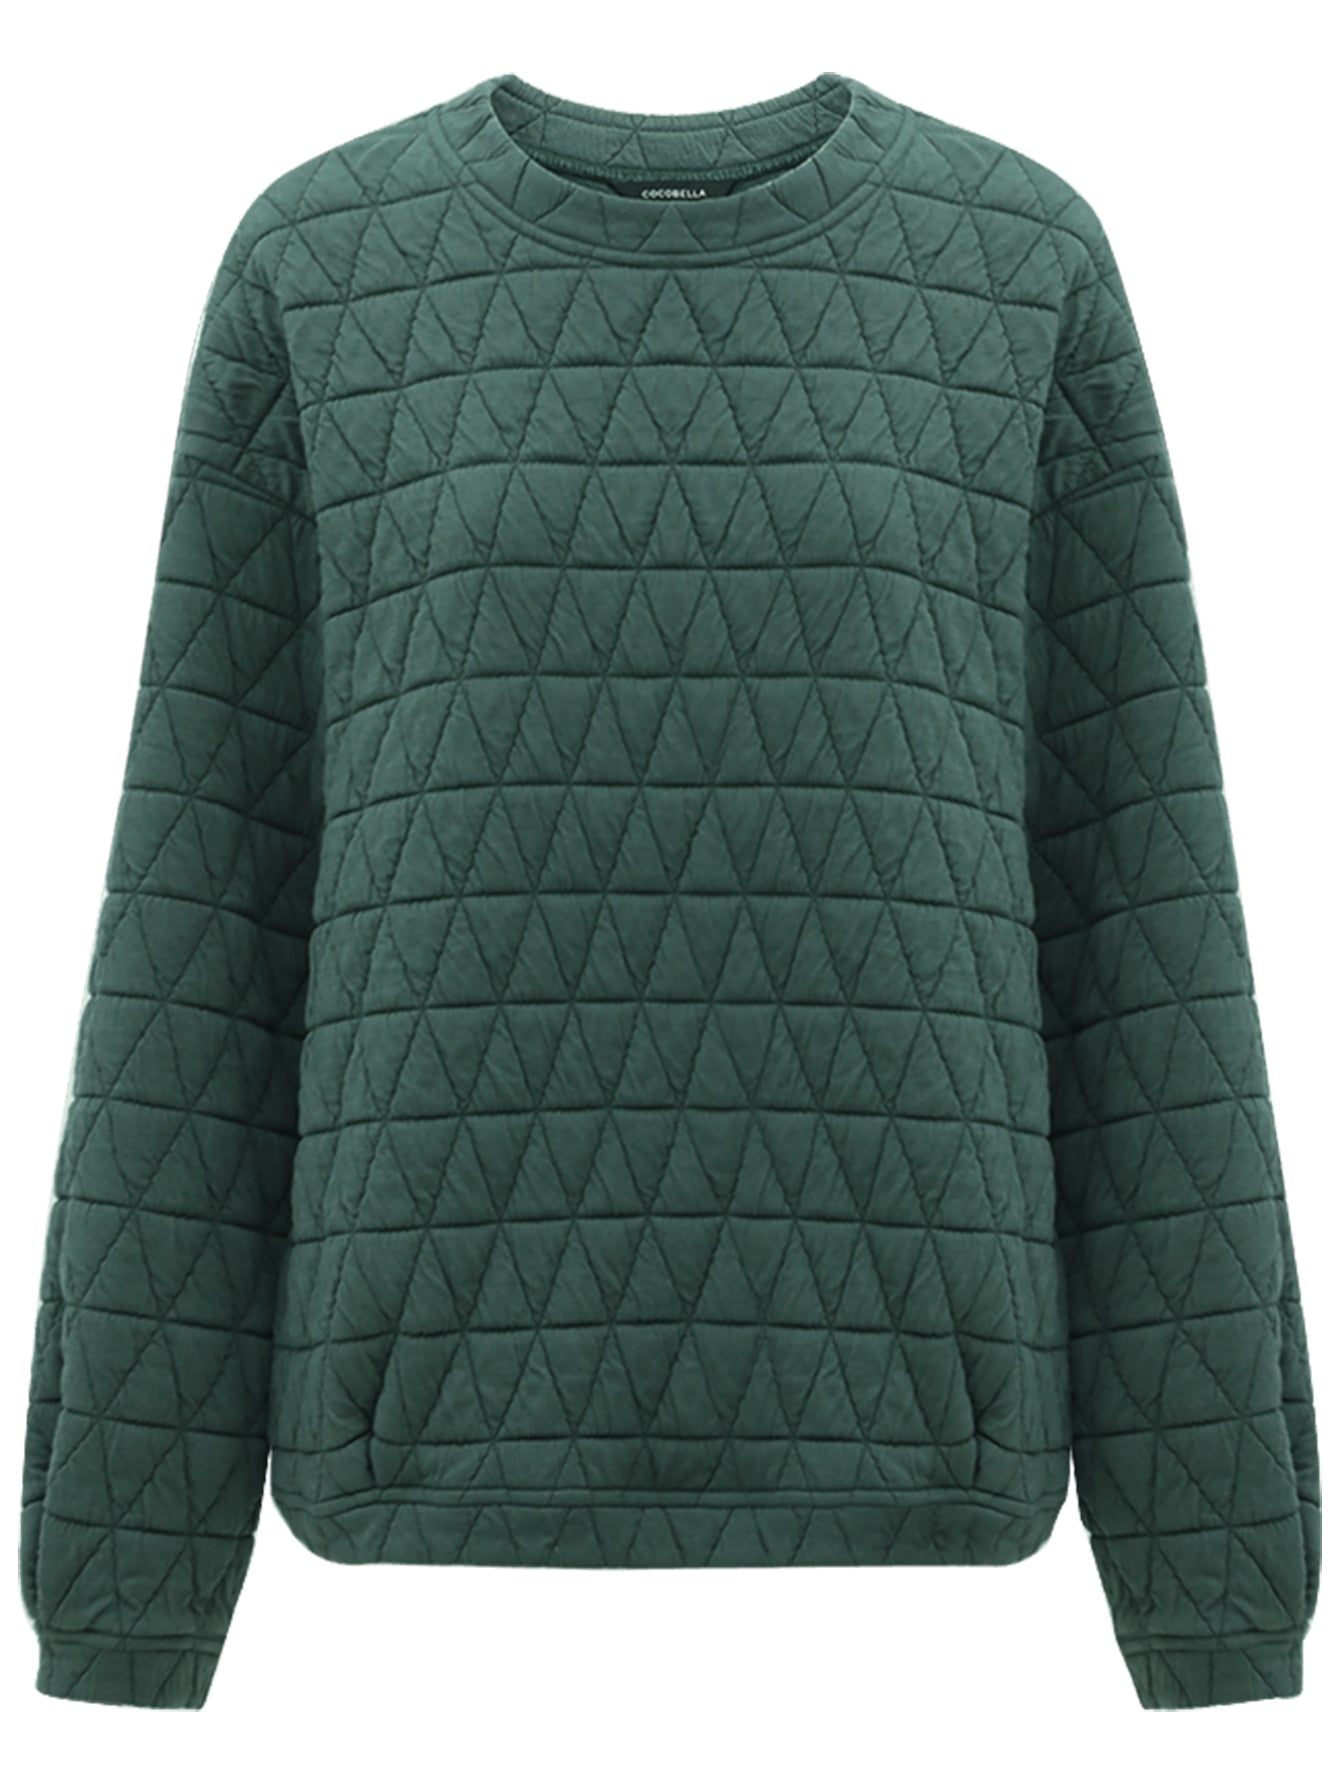 festive-geometric-quilted-green-pullover-sweater_all_green_4.jpg